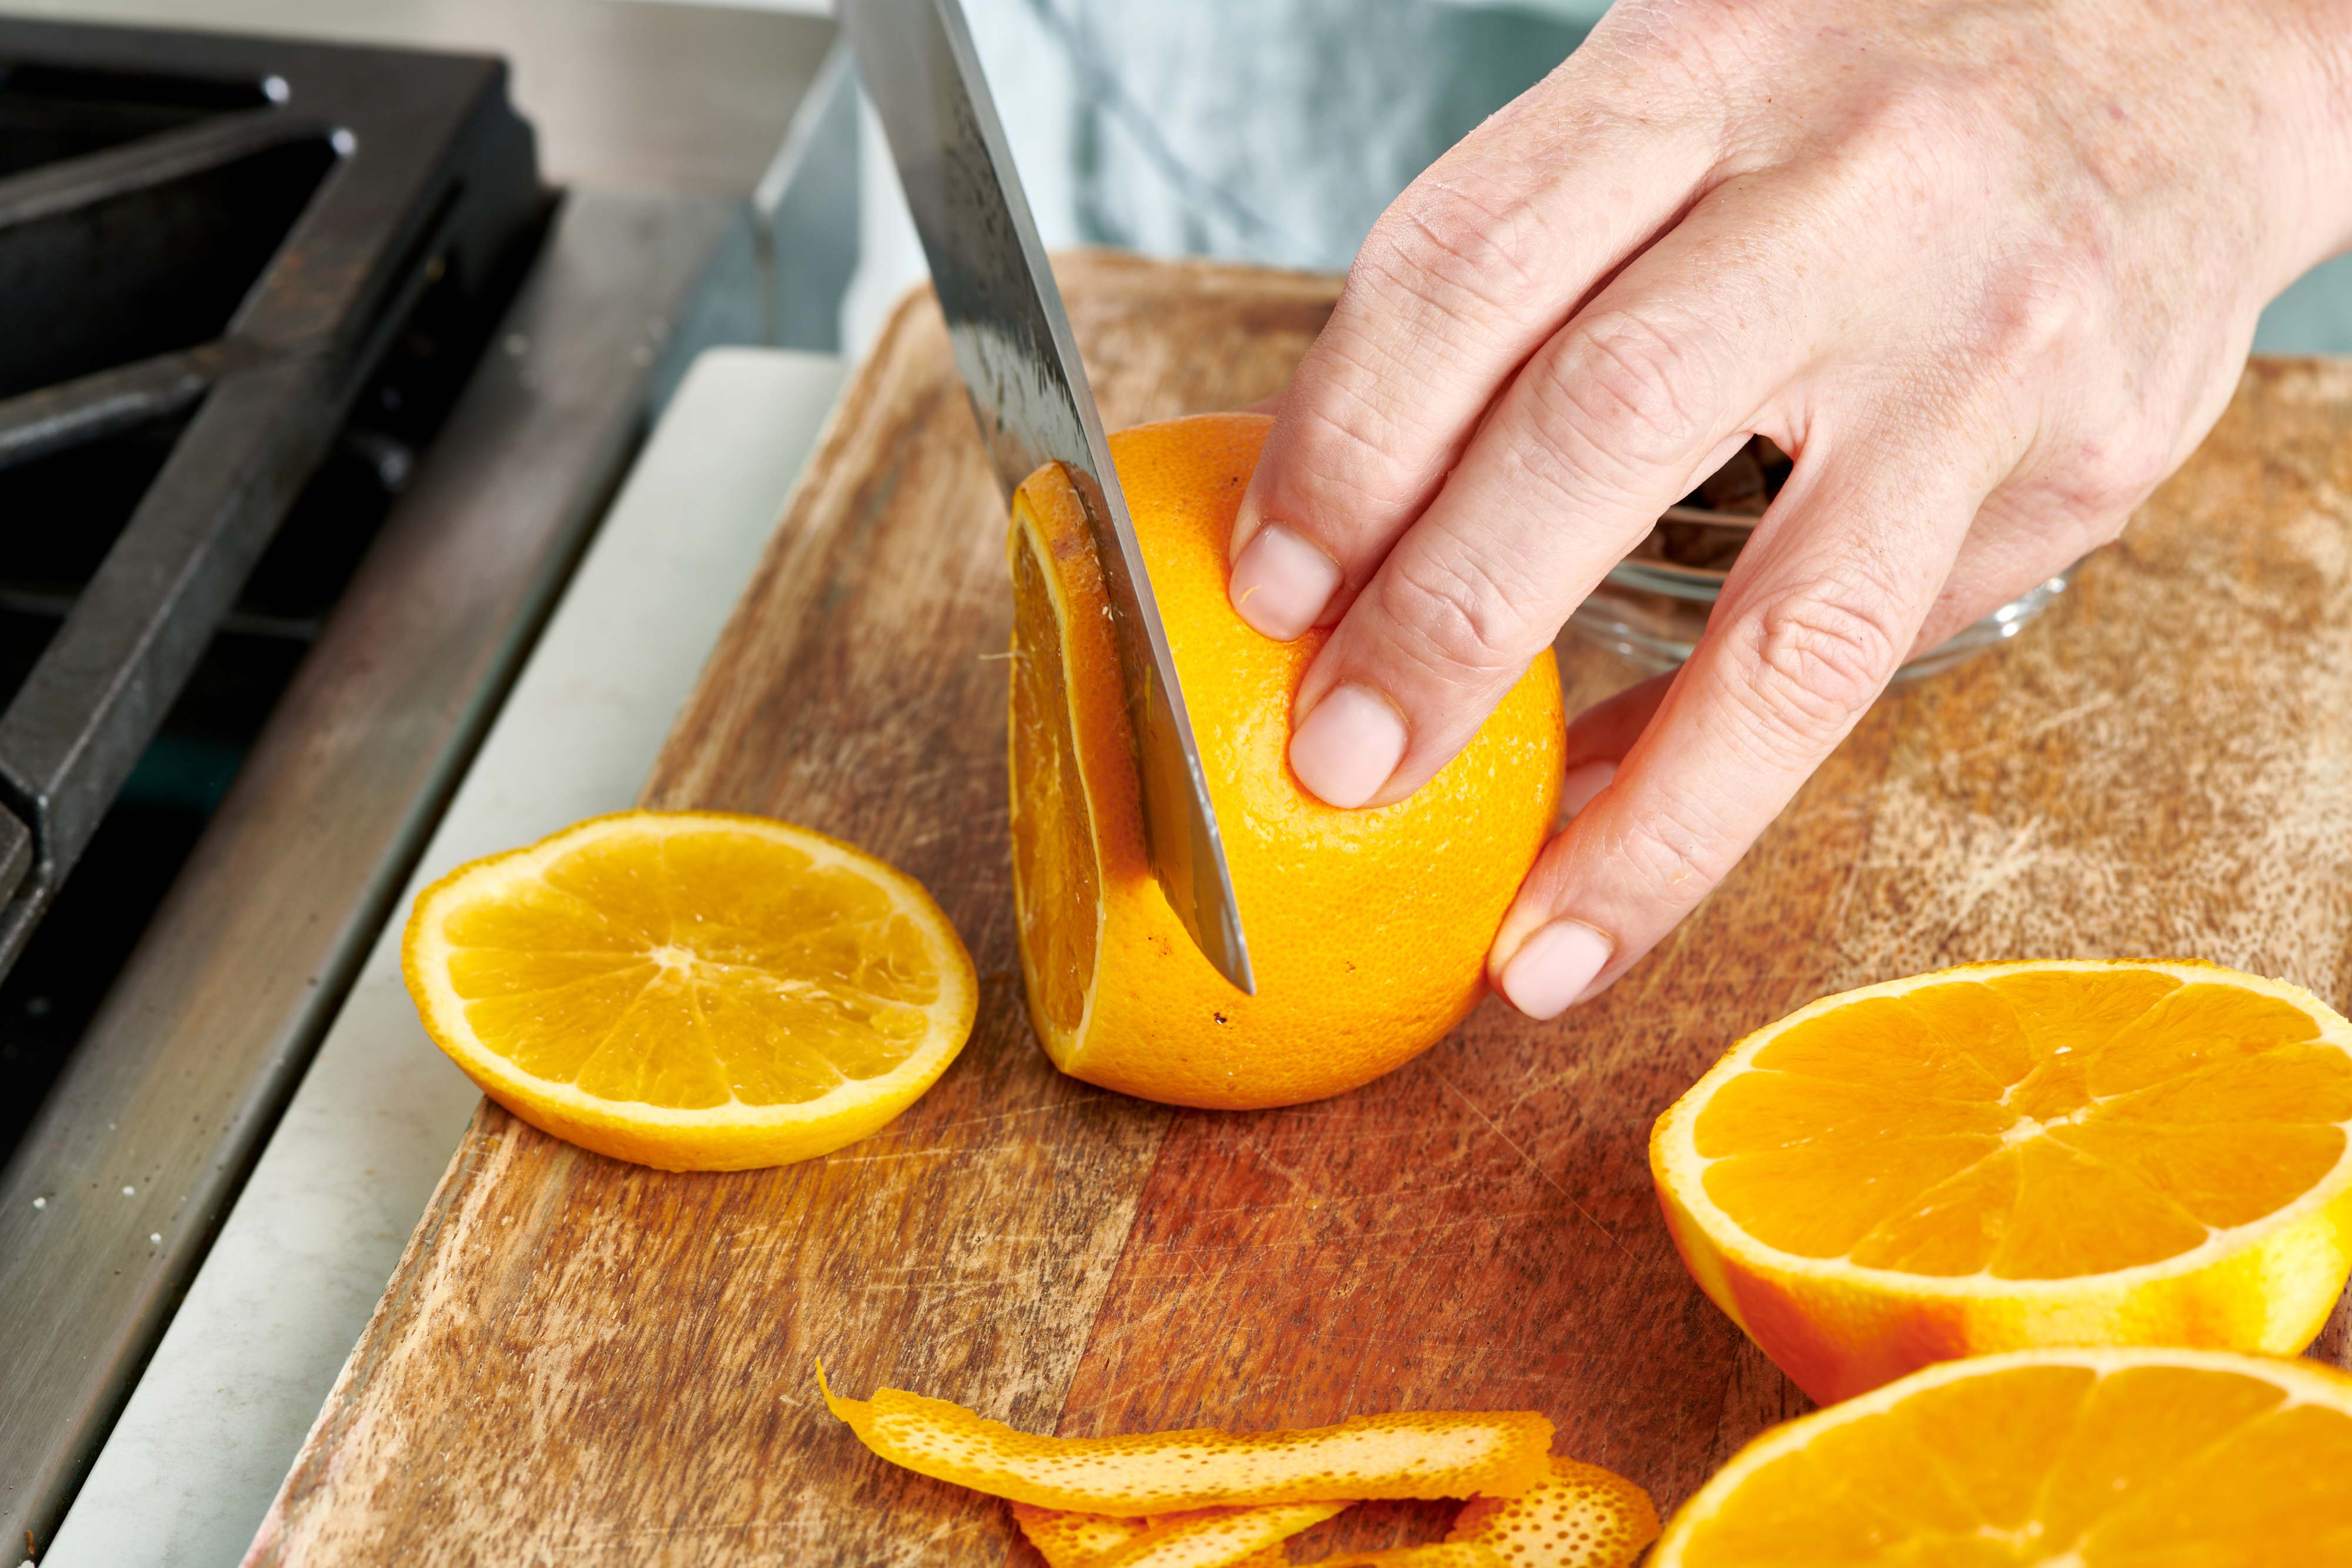 Woman using a knife to thinly slice an orange.